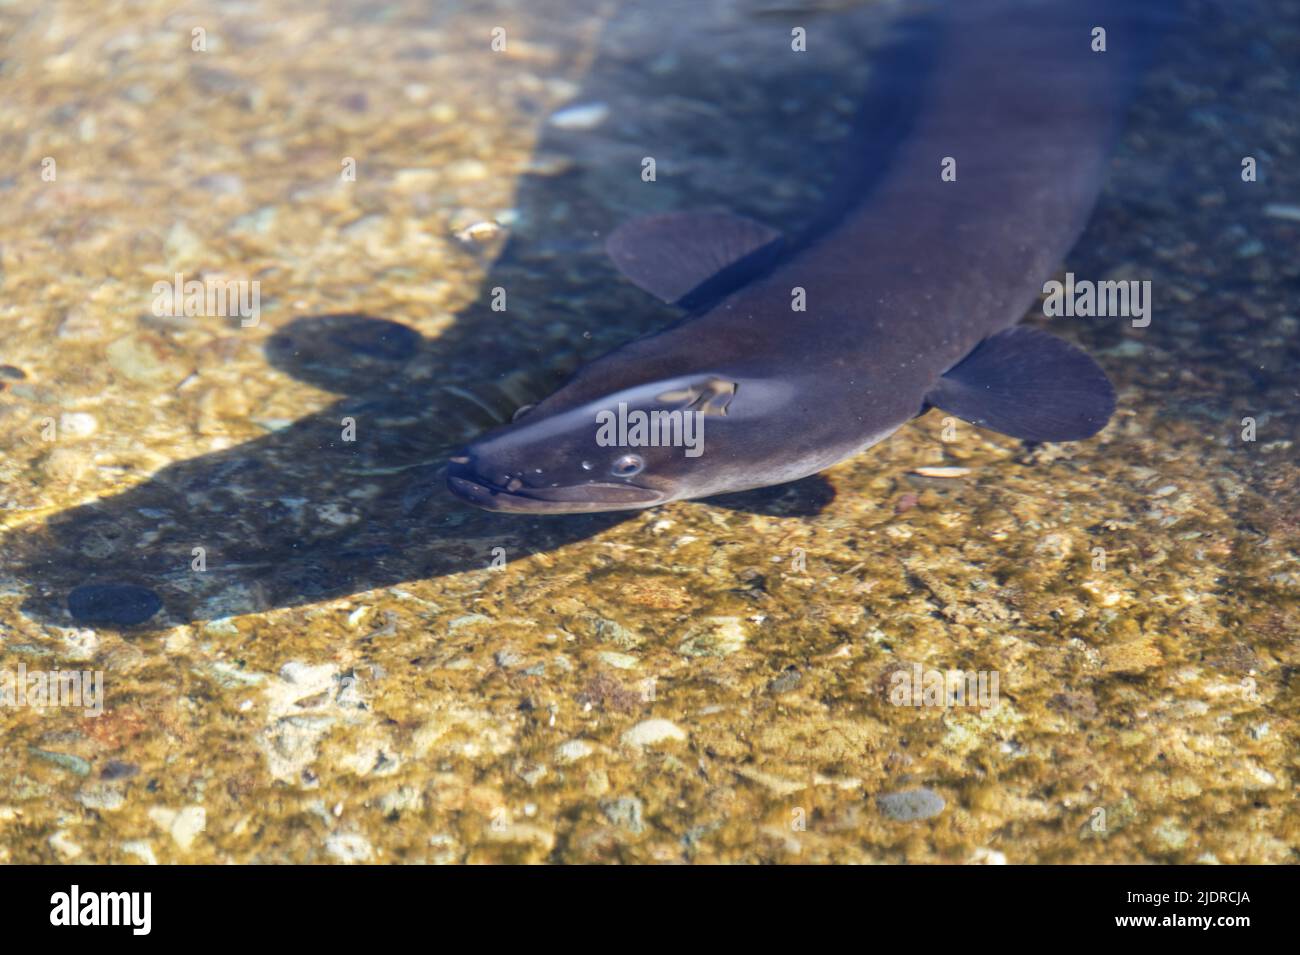 The longfinn eel is a native predat in New Zealand. It lives in fresh water and migrates to the sea to breed only once before dying. Stock Photo